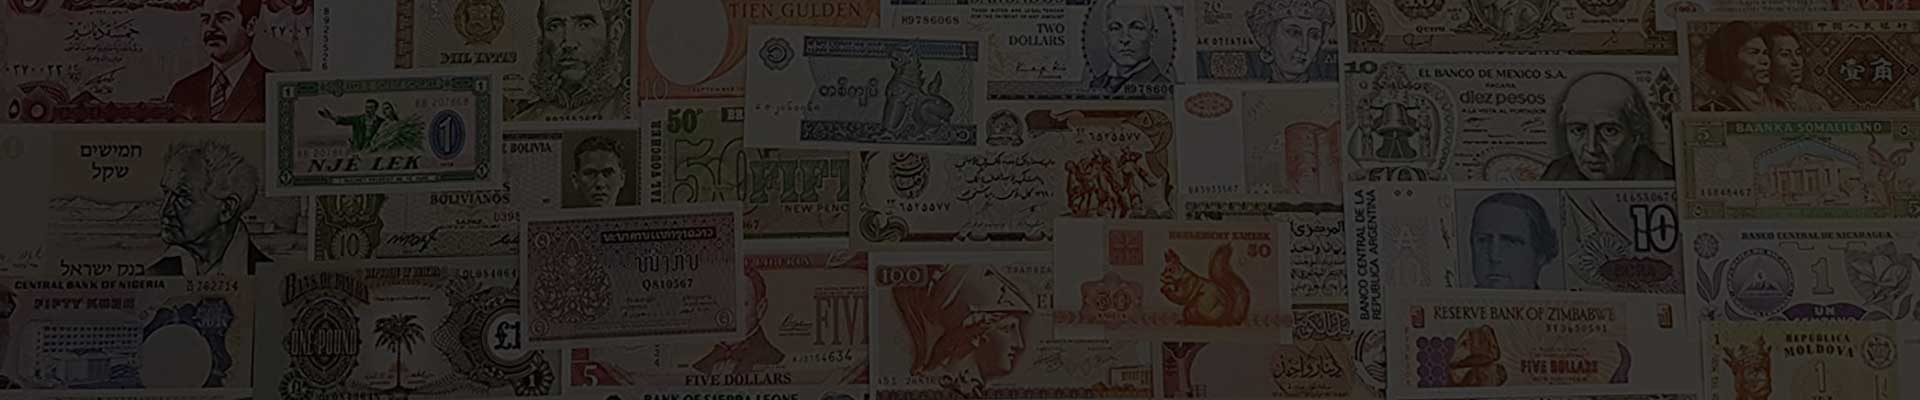 20,000 Banknote Gallery Images: A Monumental Milestone header image